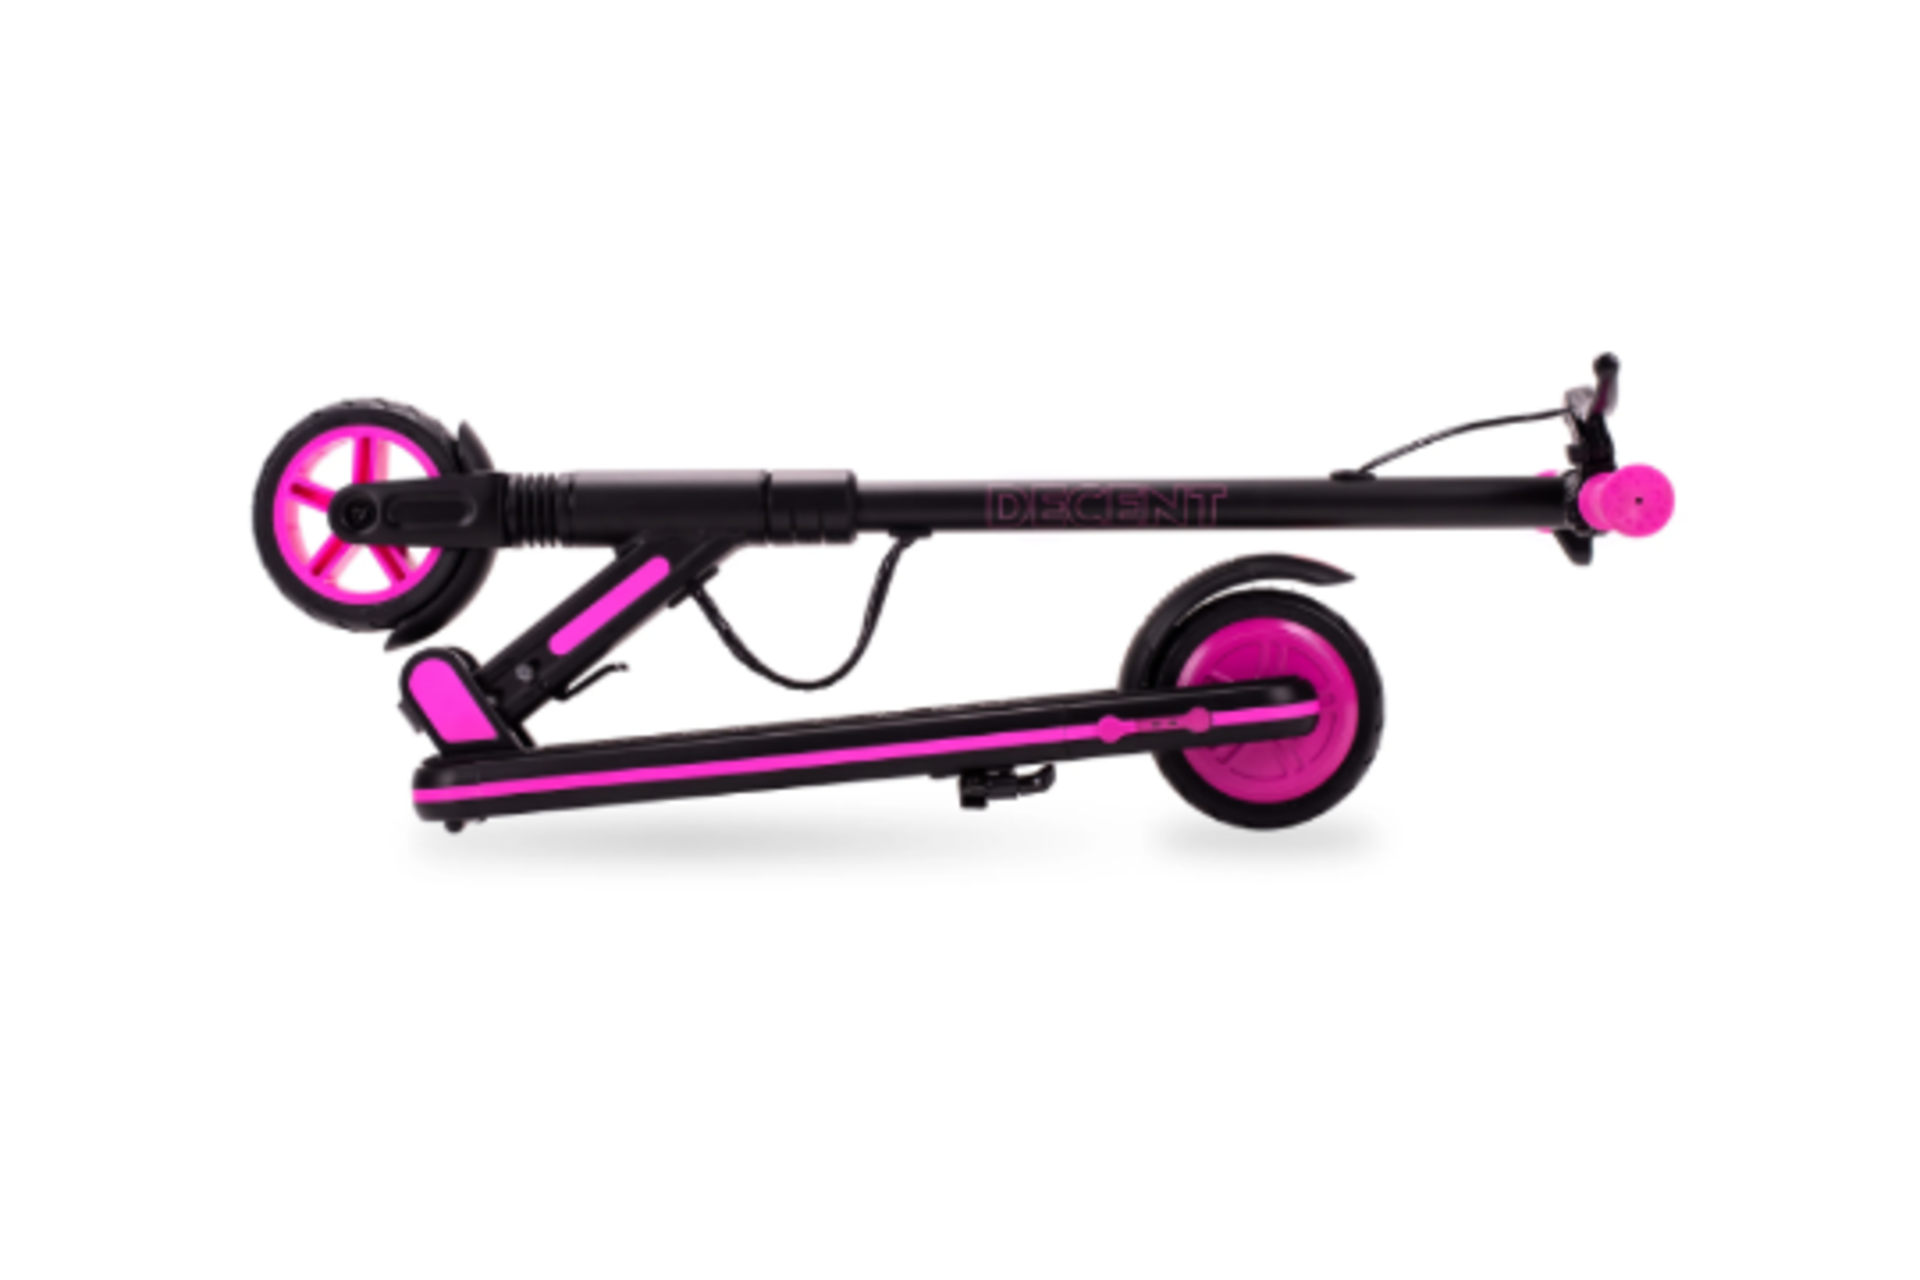 Trade Lot 10 x New &Boxed DECENT Kids Electric Scooter - Black/Pink. Let your kids zip around in - Image 2 of 3